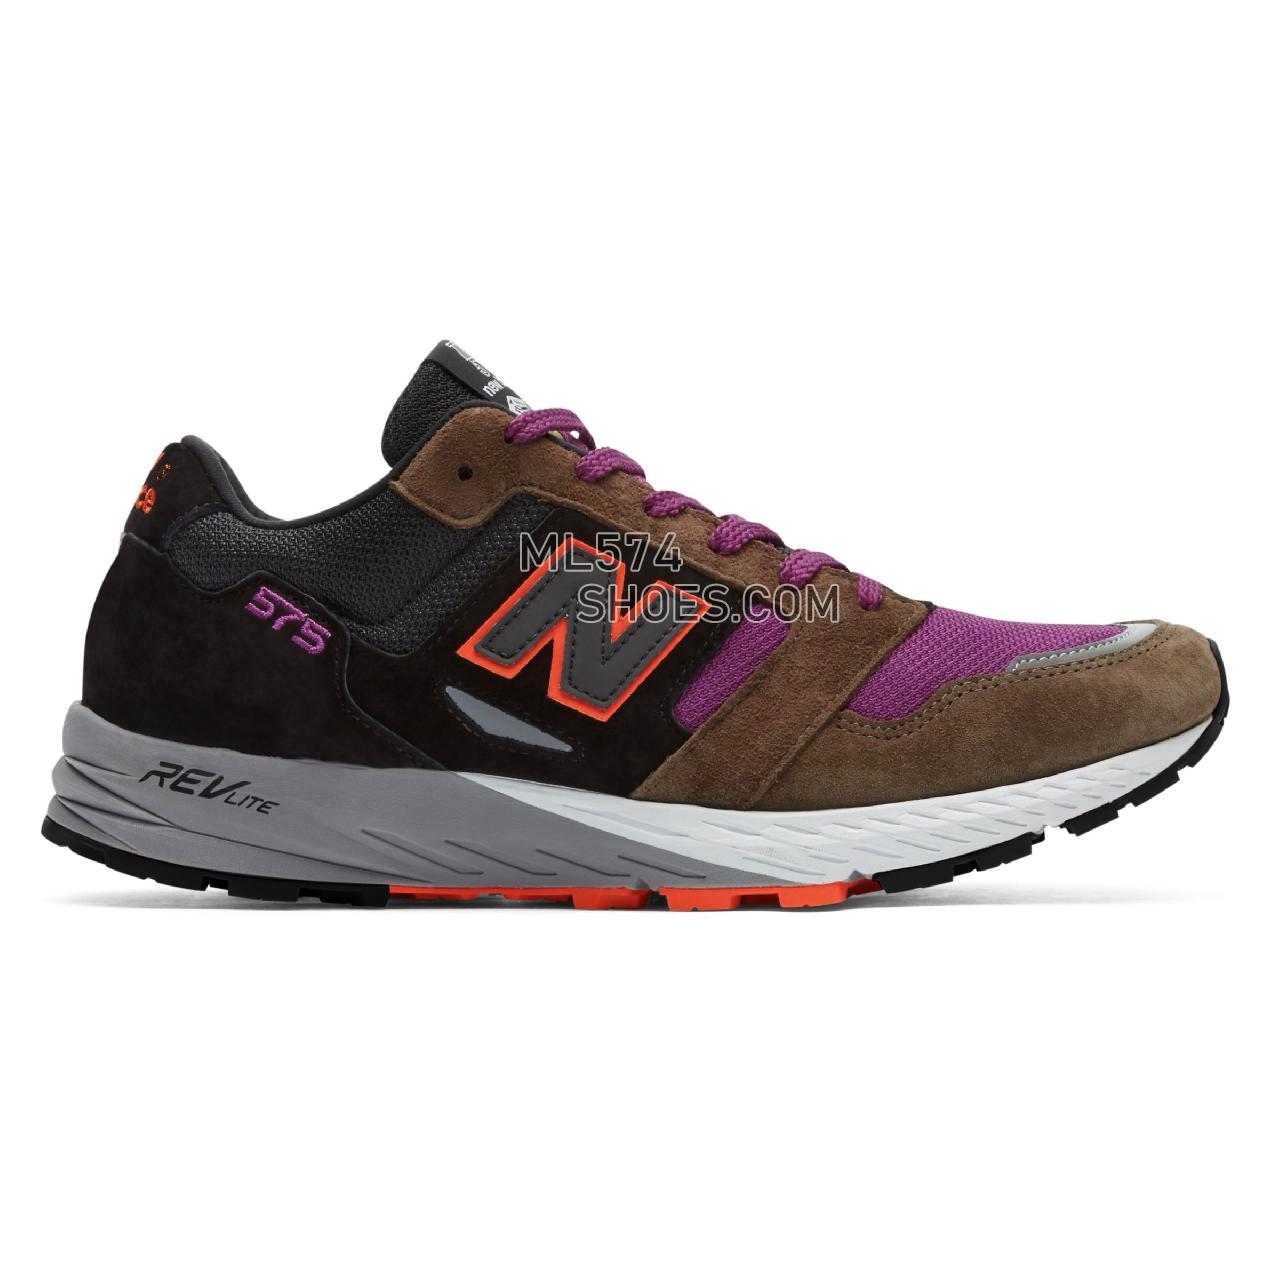 New Balance Made in UK 575 - Men's Made in UK 575 MTL575V1-26191-M - Black with Khaki and Pink - MTL575KP